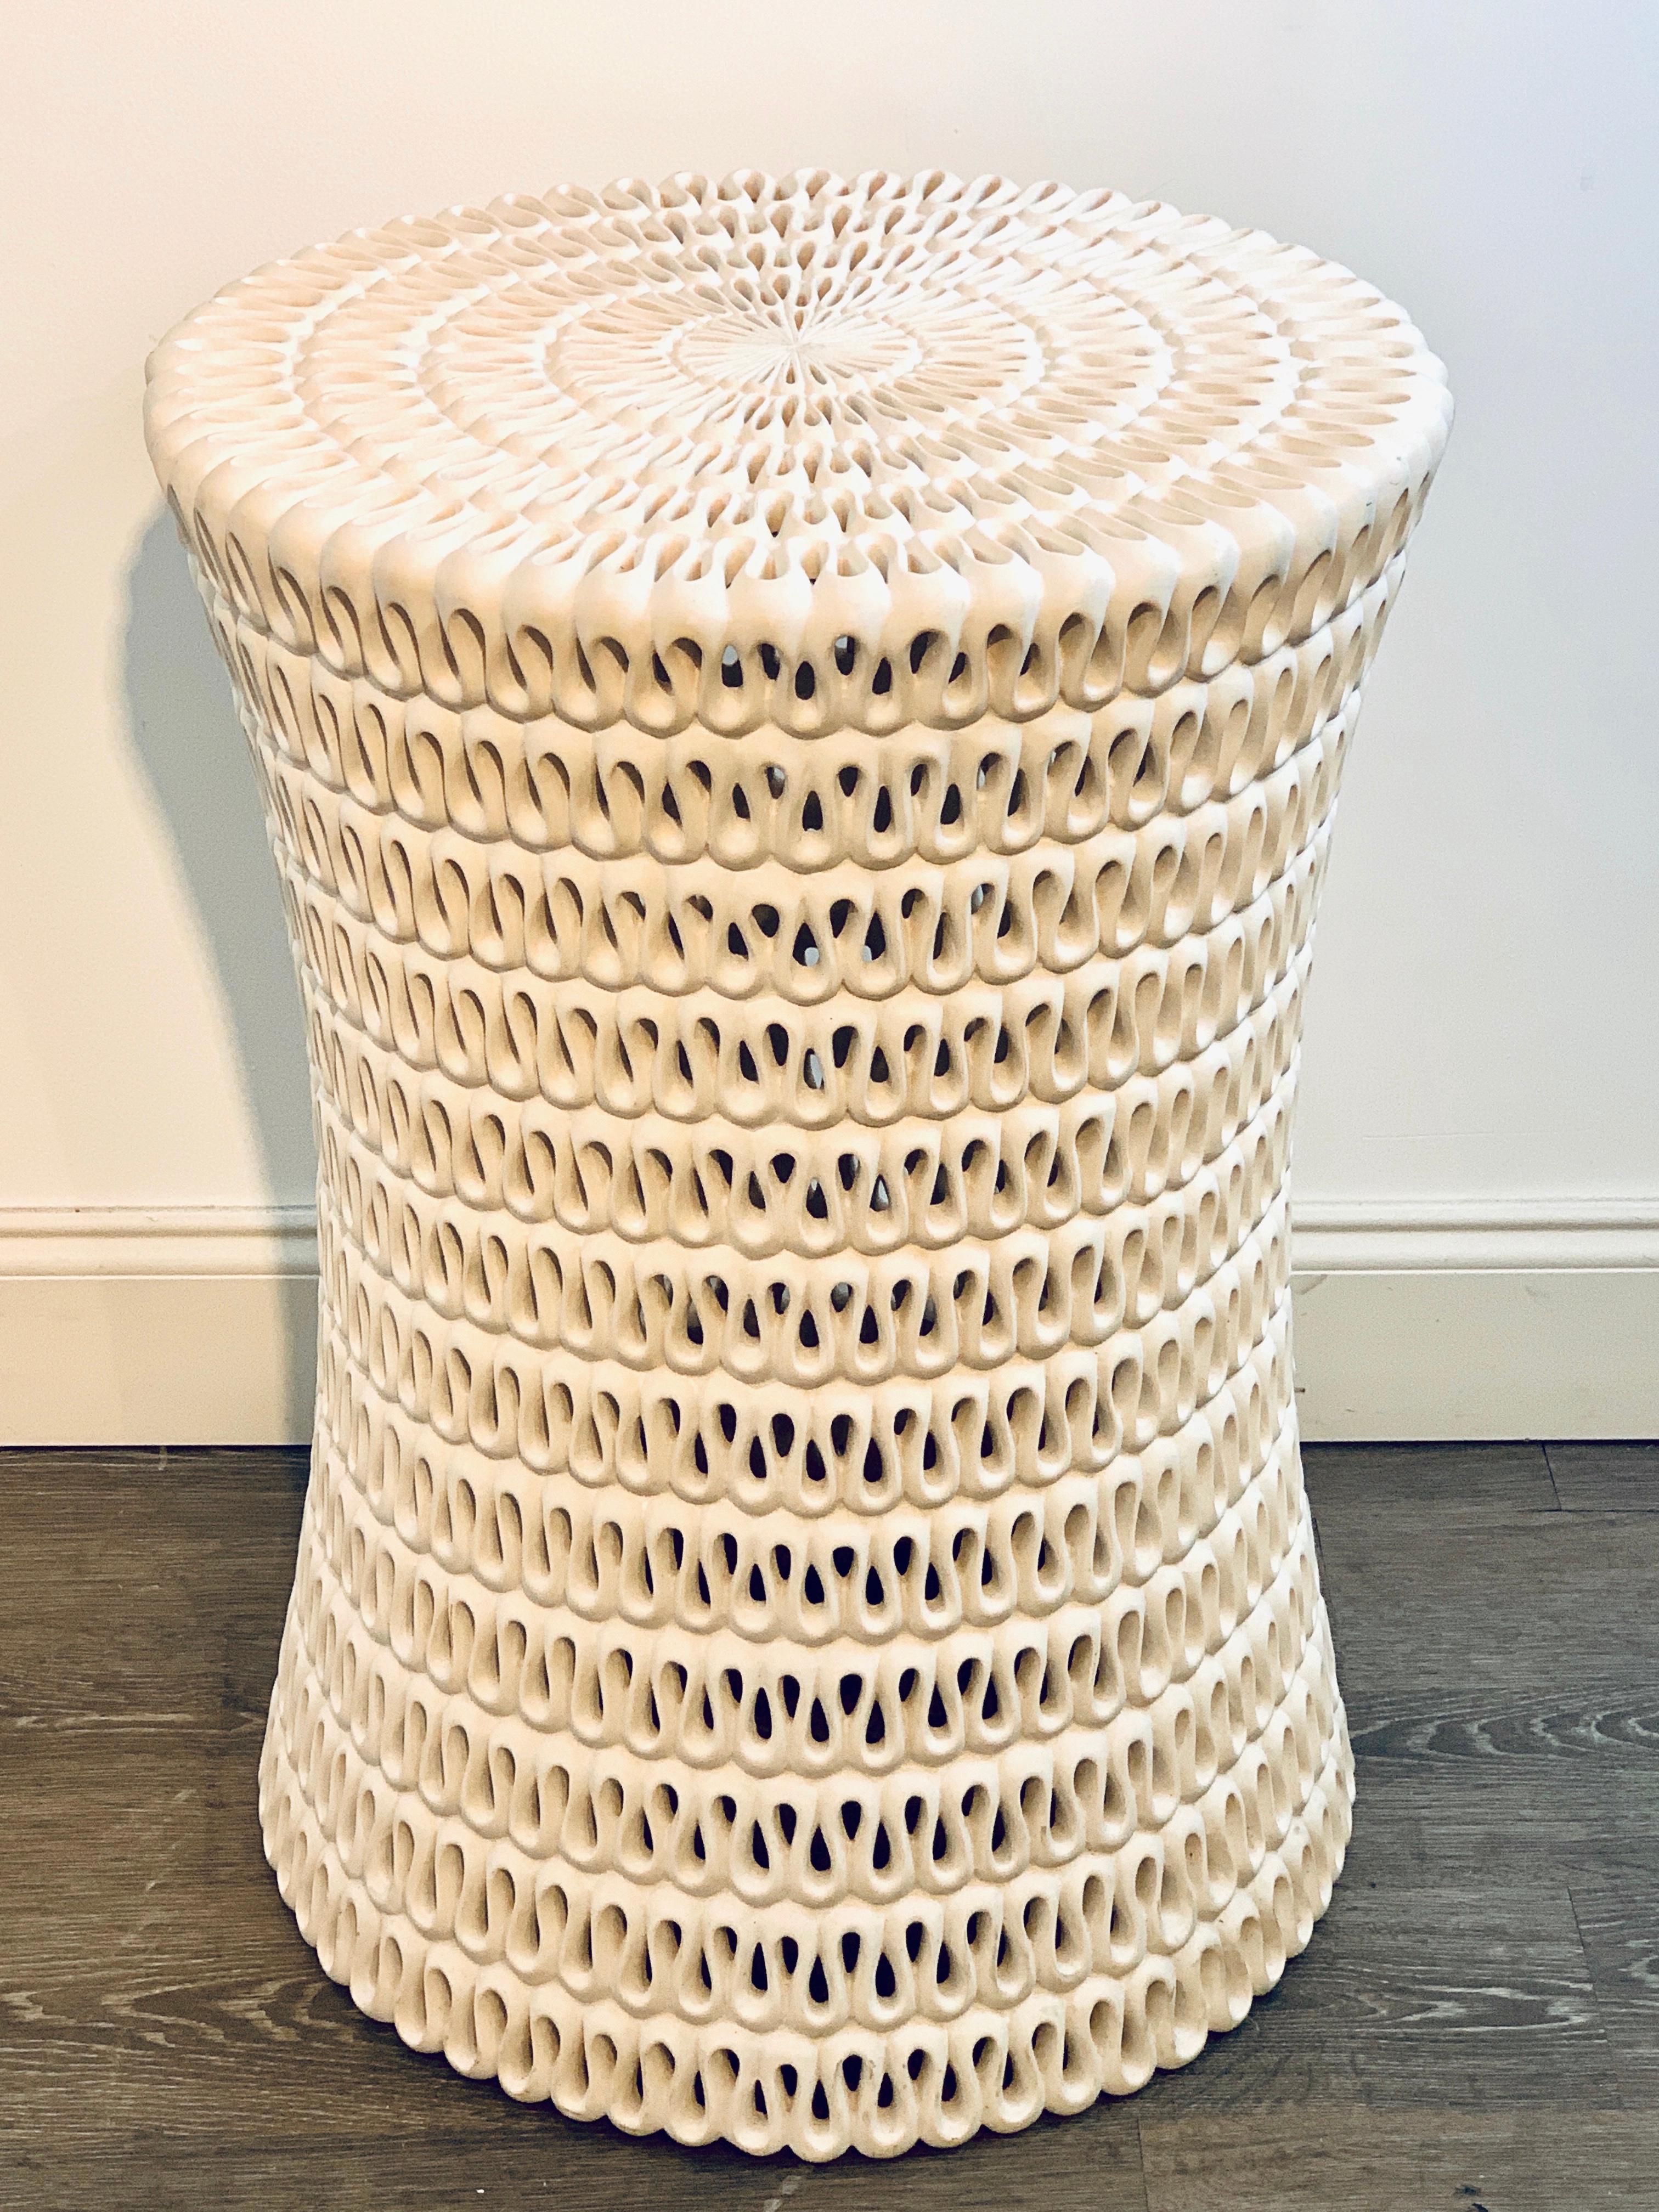 Modern pierced scroll table base
Modern pierced scroll table base, with continuous undulating line pattern. Lacquered resin in white.
Can be used without glass or add glass top up to 42 inches in diameter.
Can be used inside or outside
